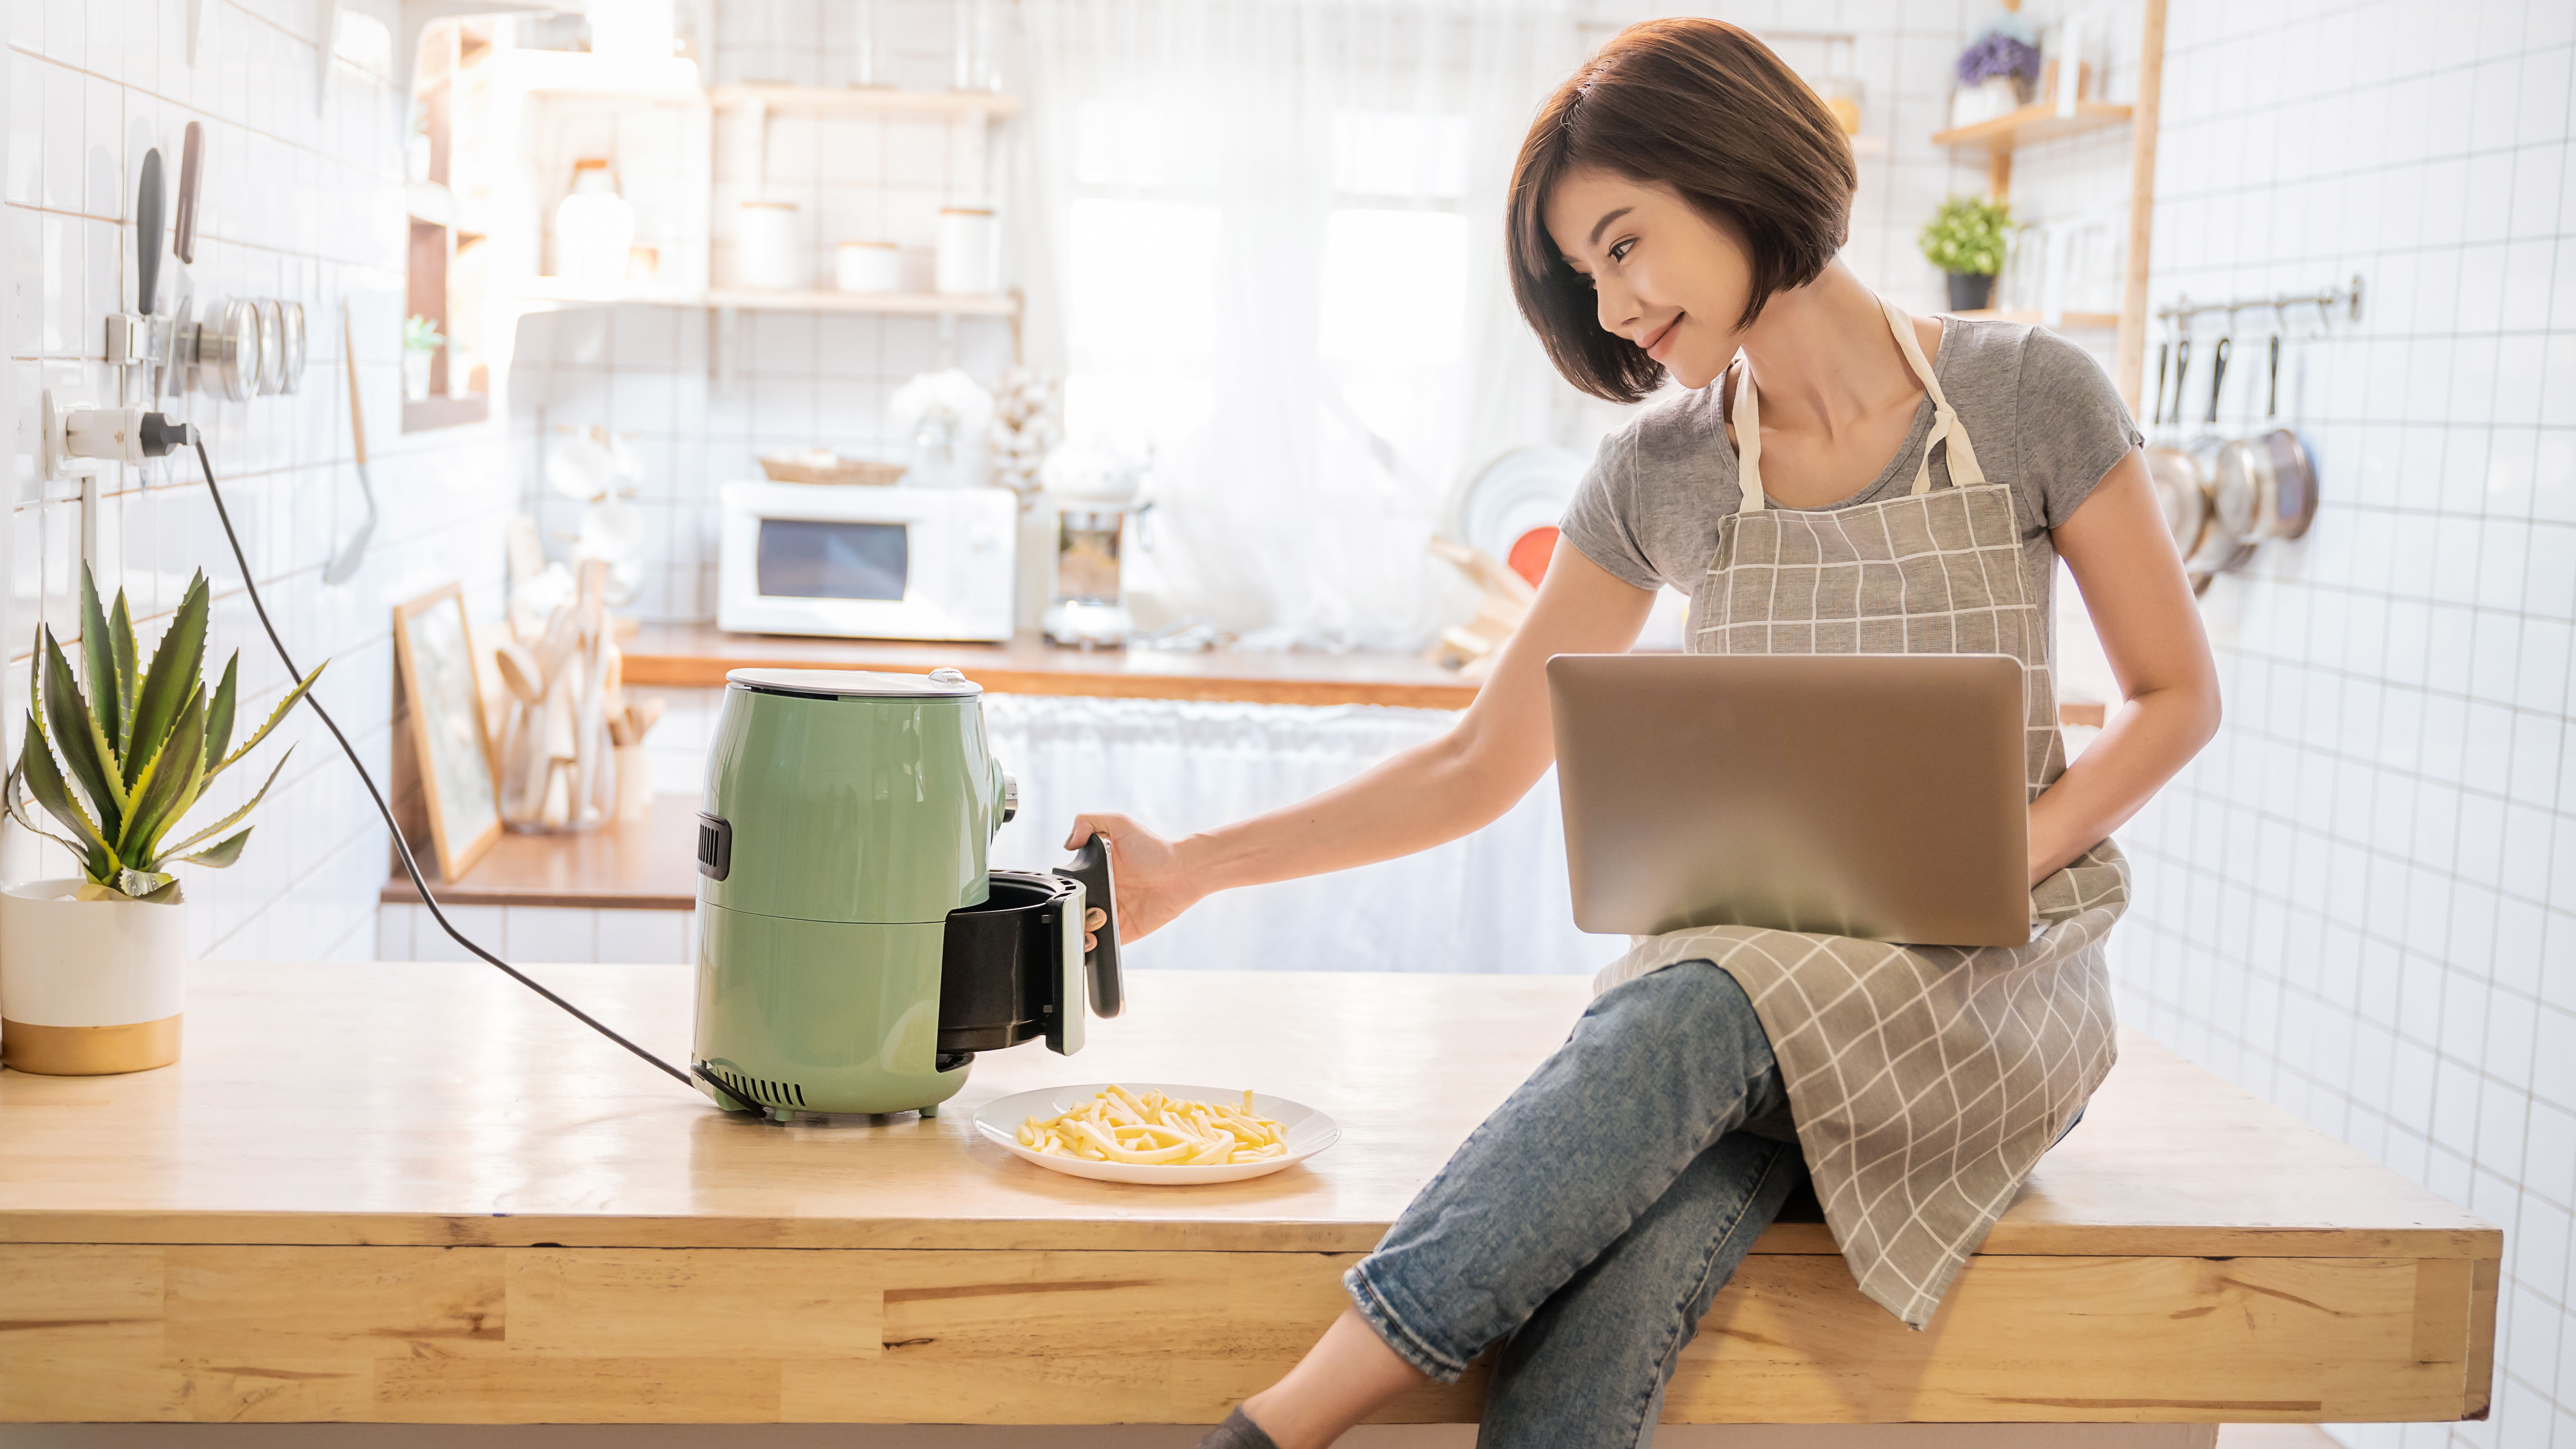 Woman cooking with an air fryer with laptop balanced on her lap while sitting at a table